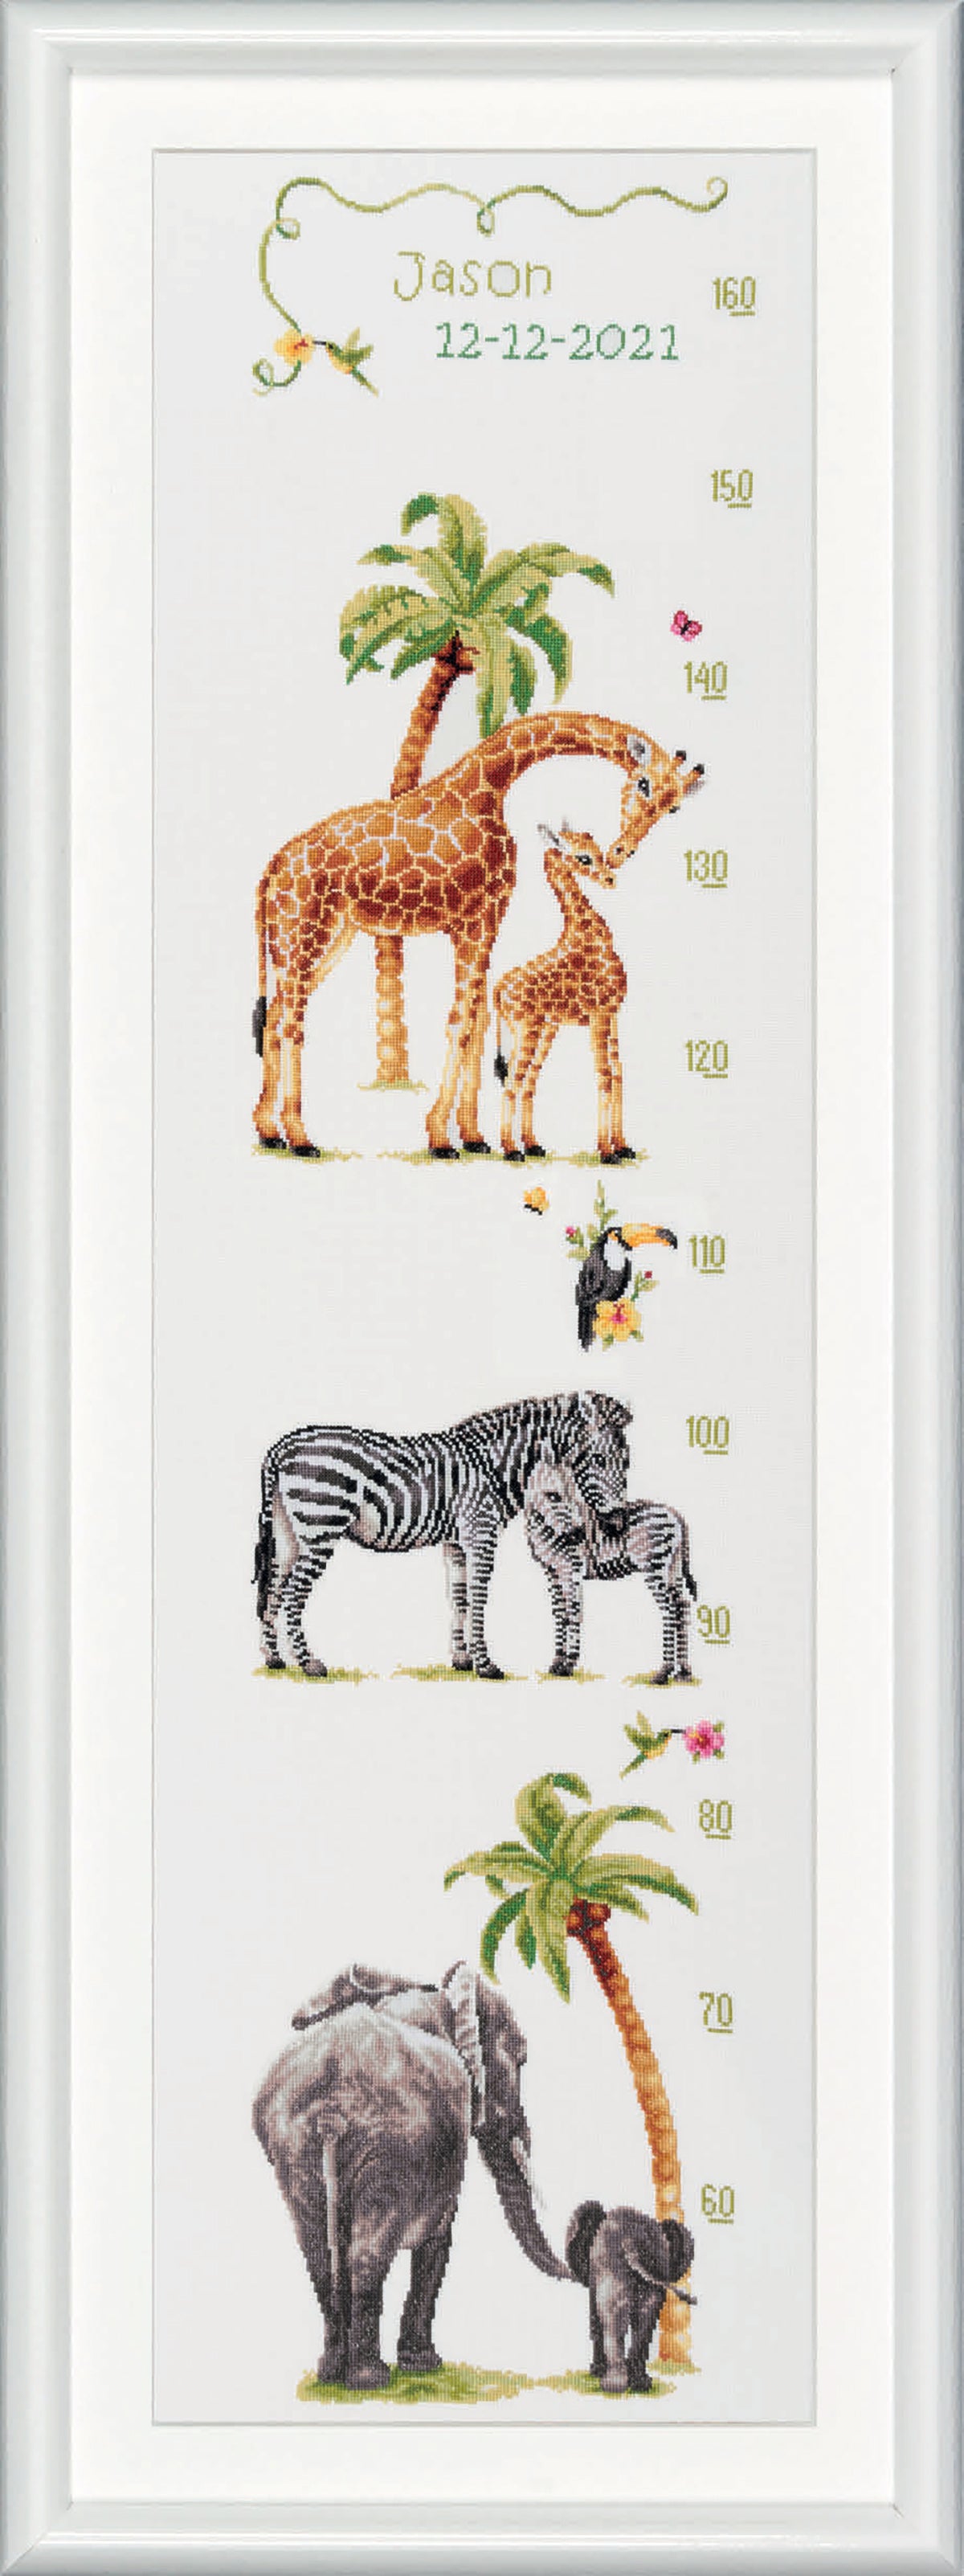 The design forms a long chart to measure height. Showcasing different wild animals with their offspring. You can check your toddler’s growth with clearly marked numbers. It is perfect for display purposes in your childs room. The well-assorted kit is suitable for all skill levels. Whether you are experienced or have just begun. The DIY kit step-by-step guides you through the embroidery process.